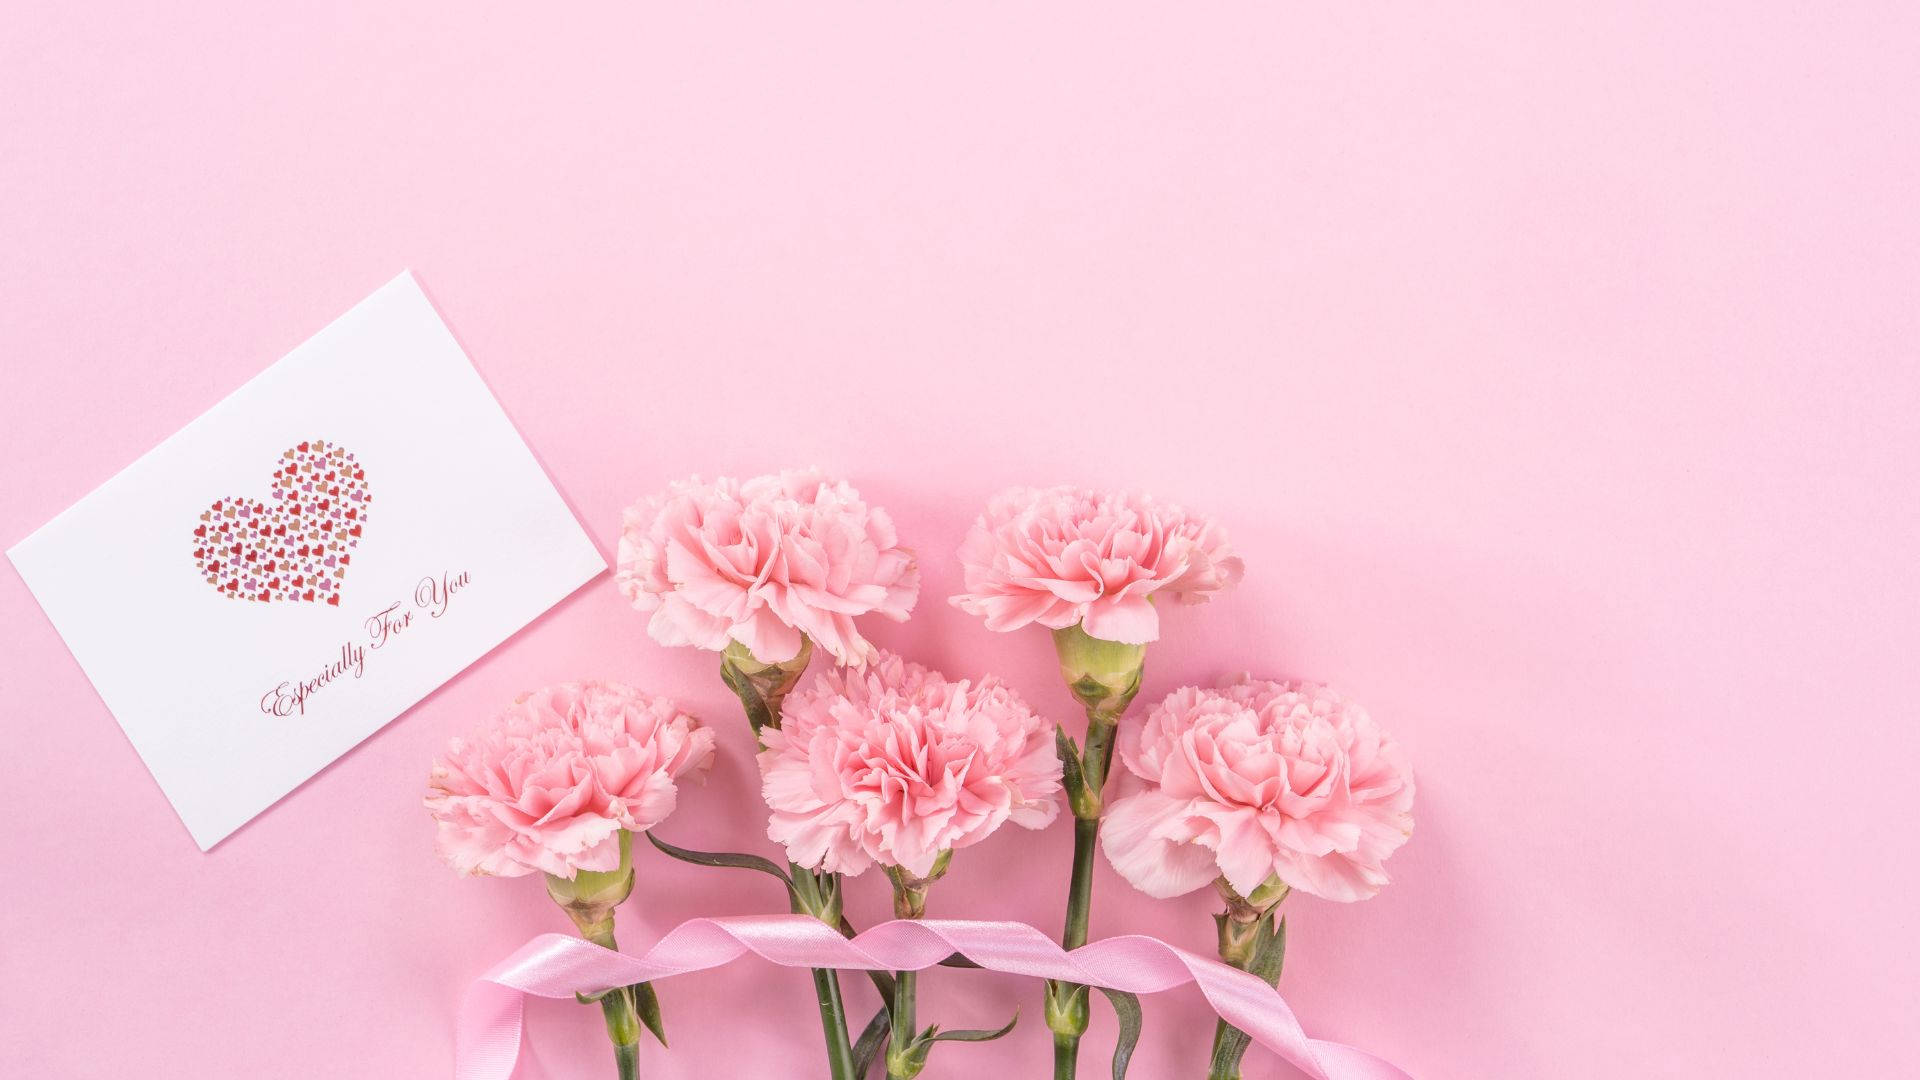 Baby Pink Carnation Flowers With Card Background